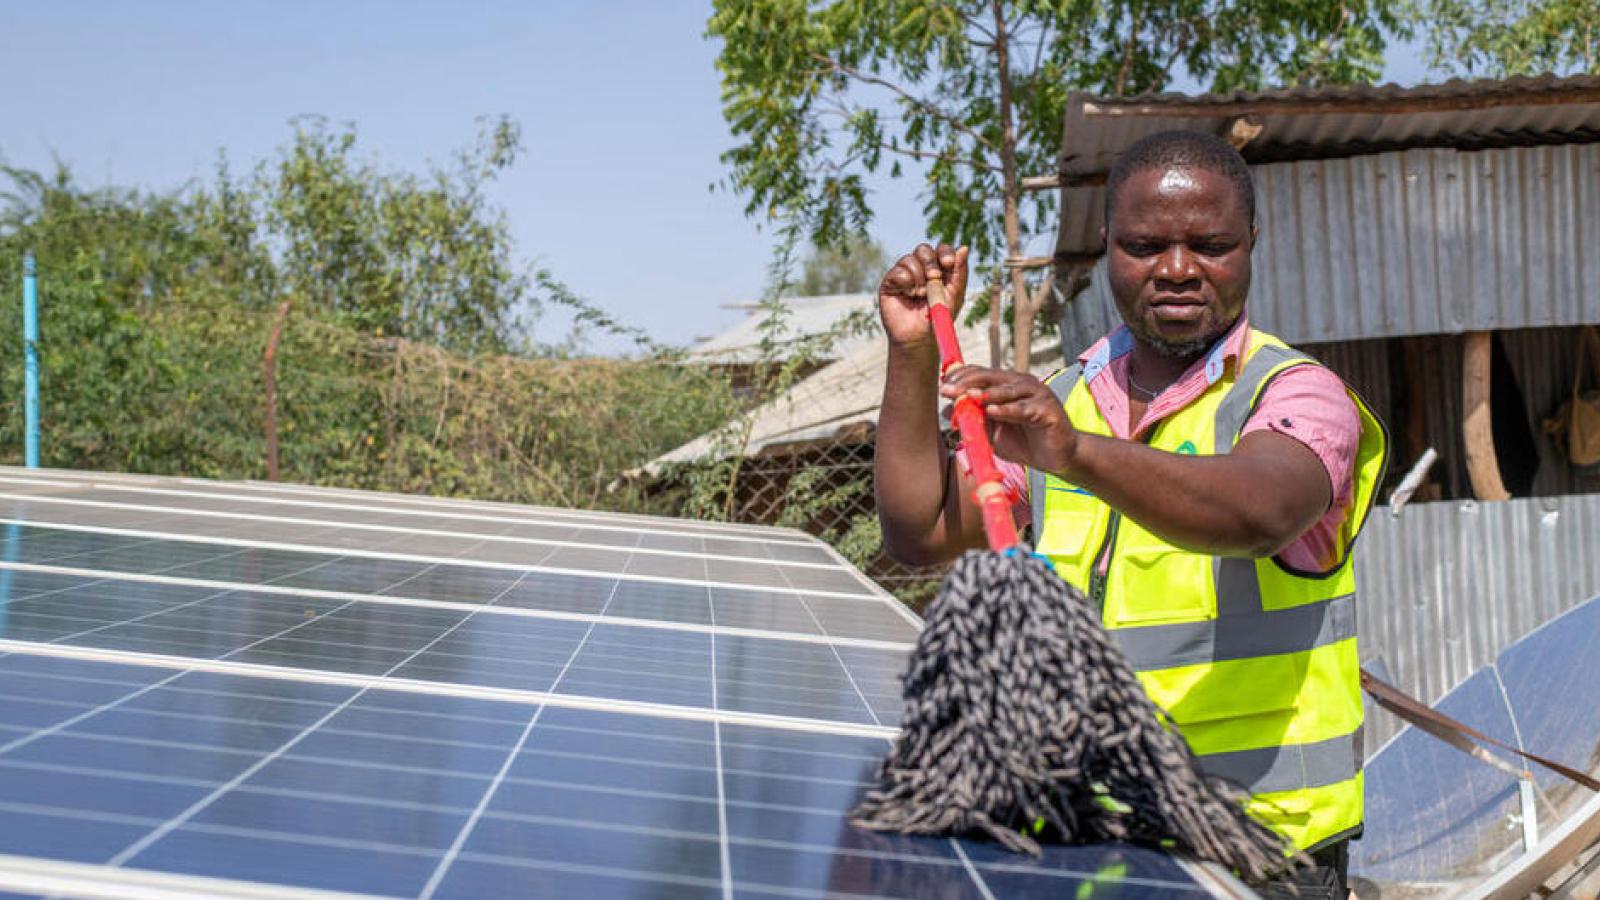 Man cleaning solar panels in a refugee camp